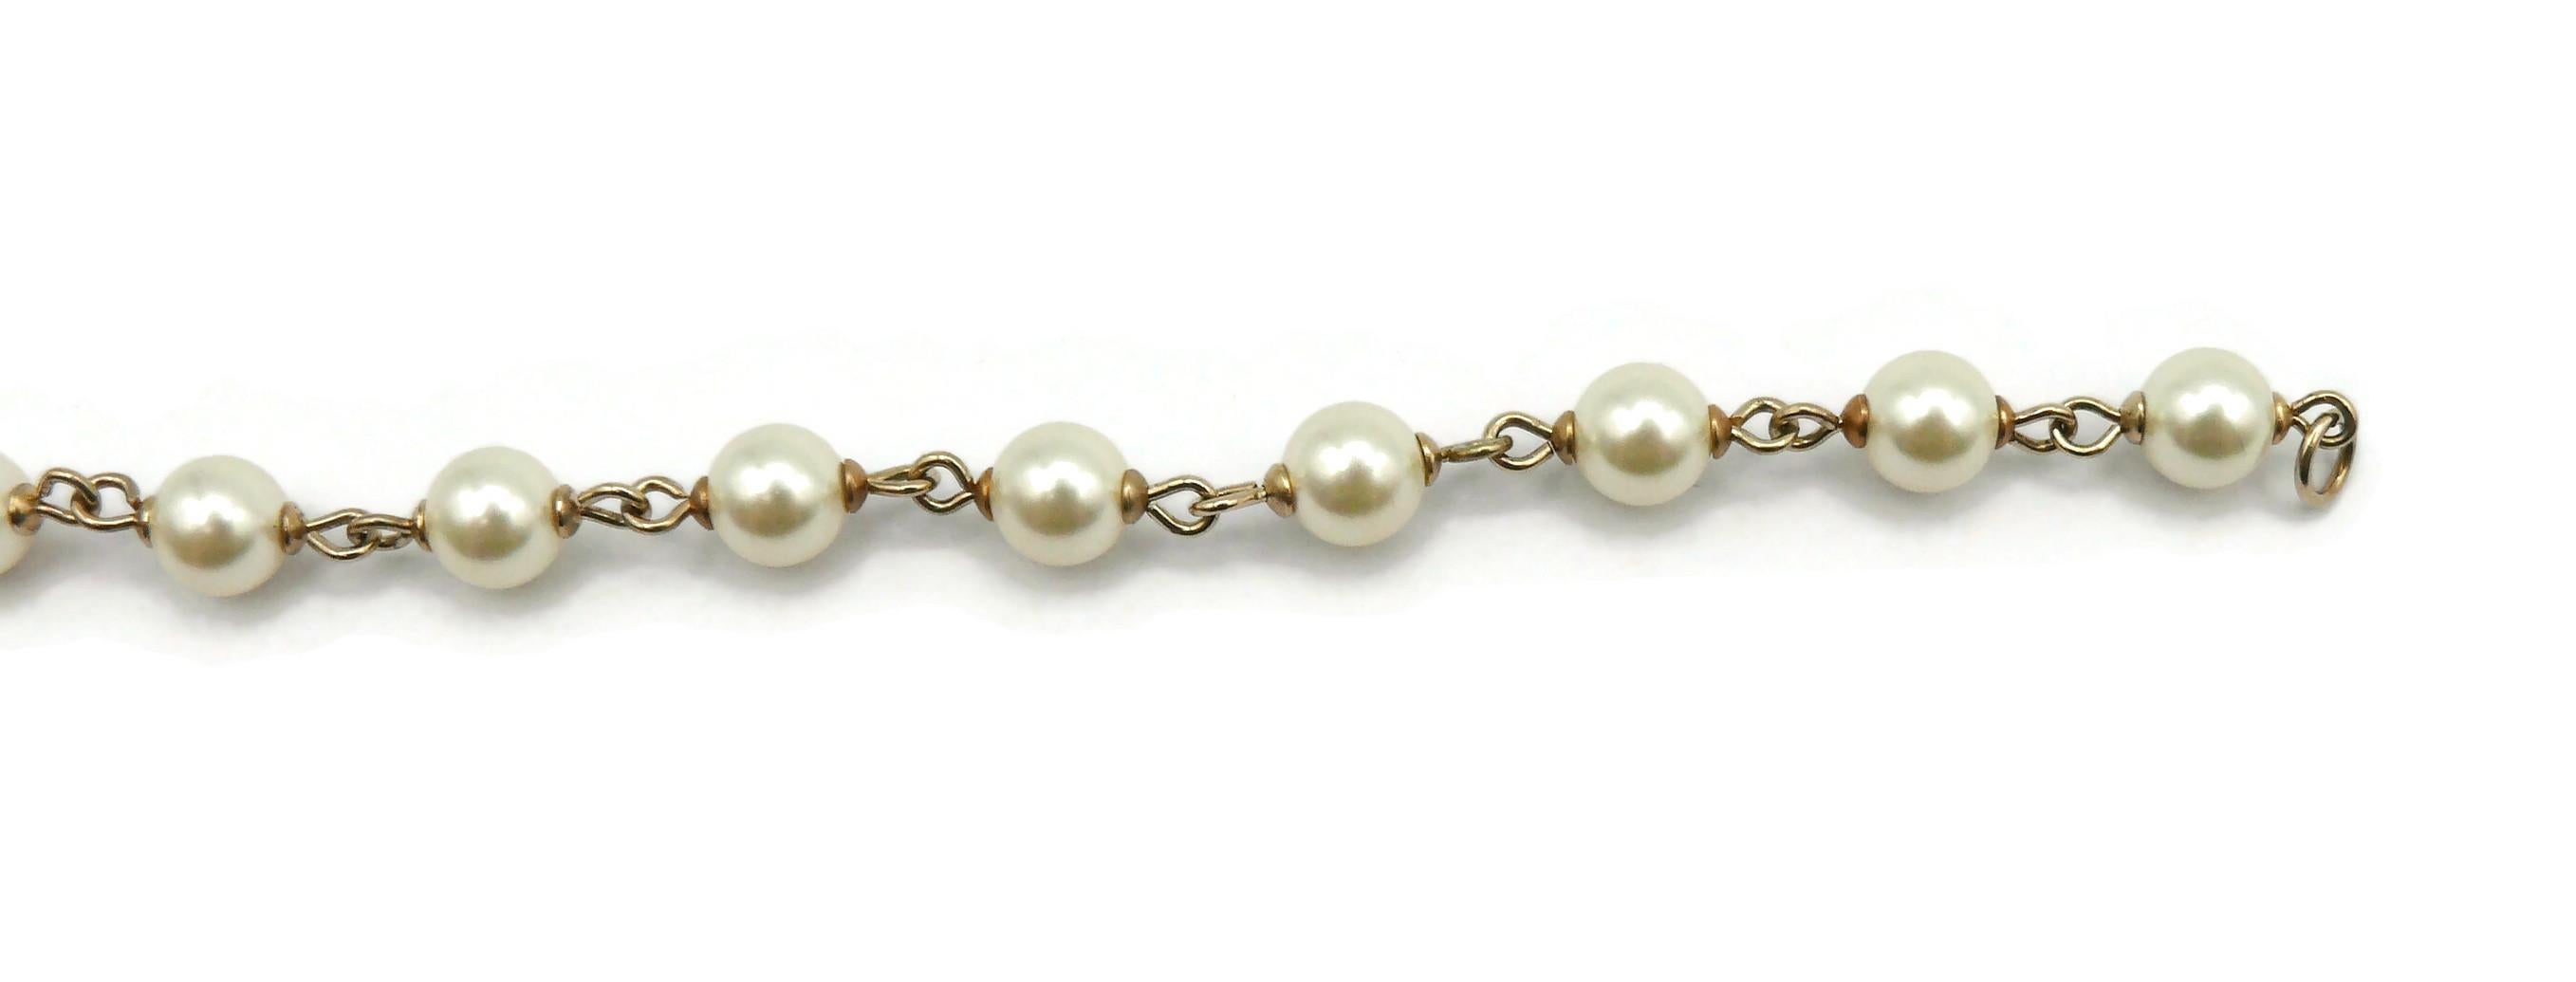 CHANEL by KARL LAGERFELD Faux Pearl CC Logo Necklace, 2008 For Sale 7